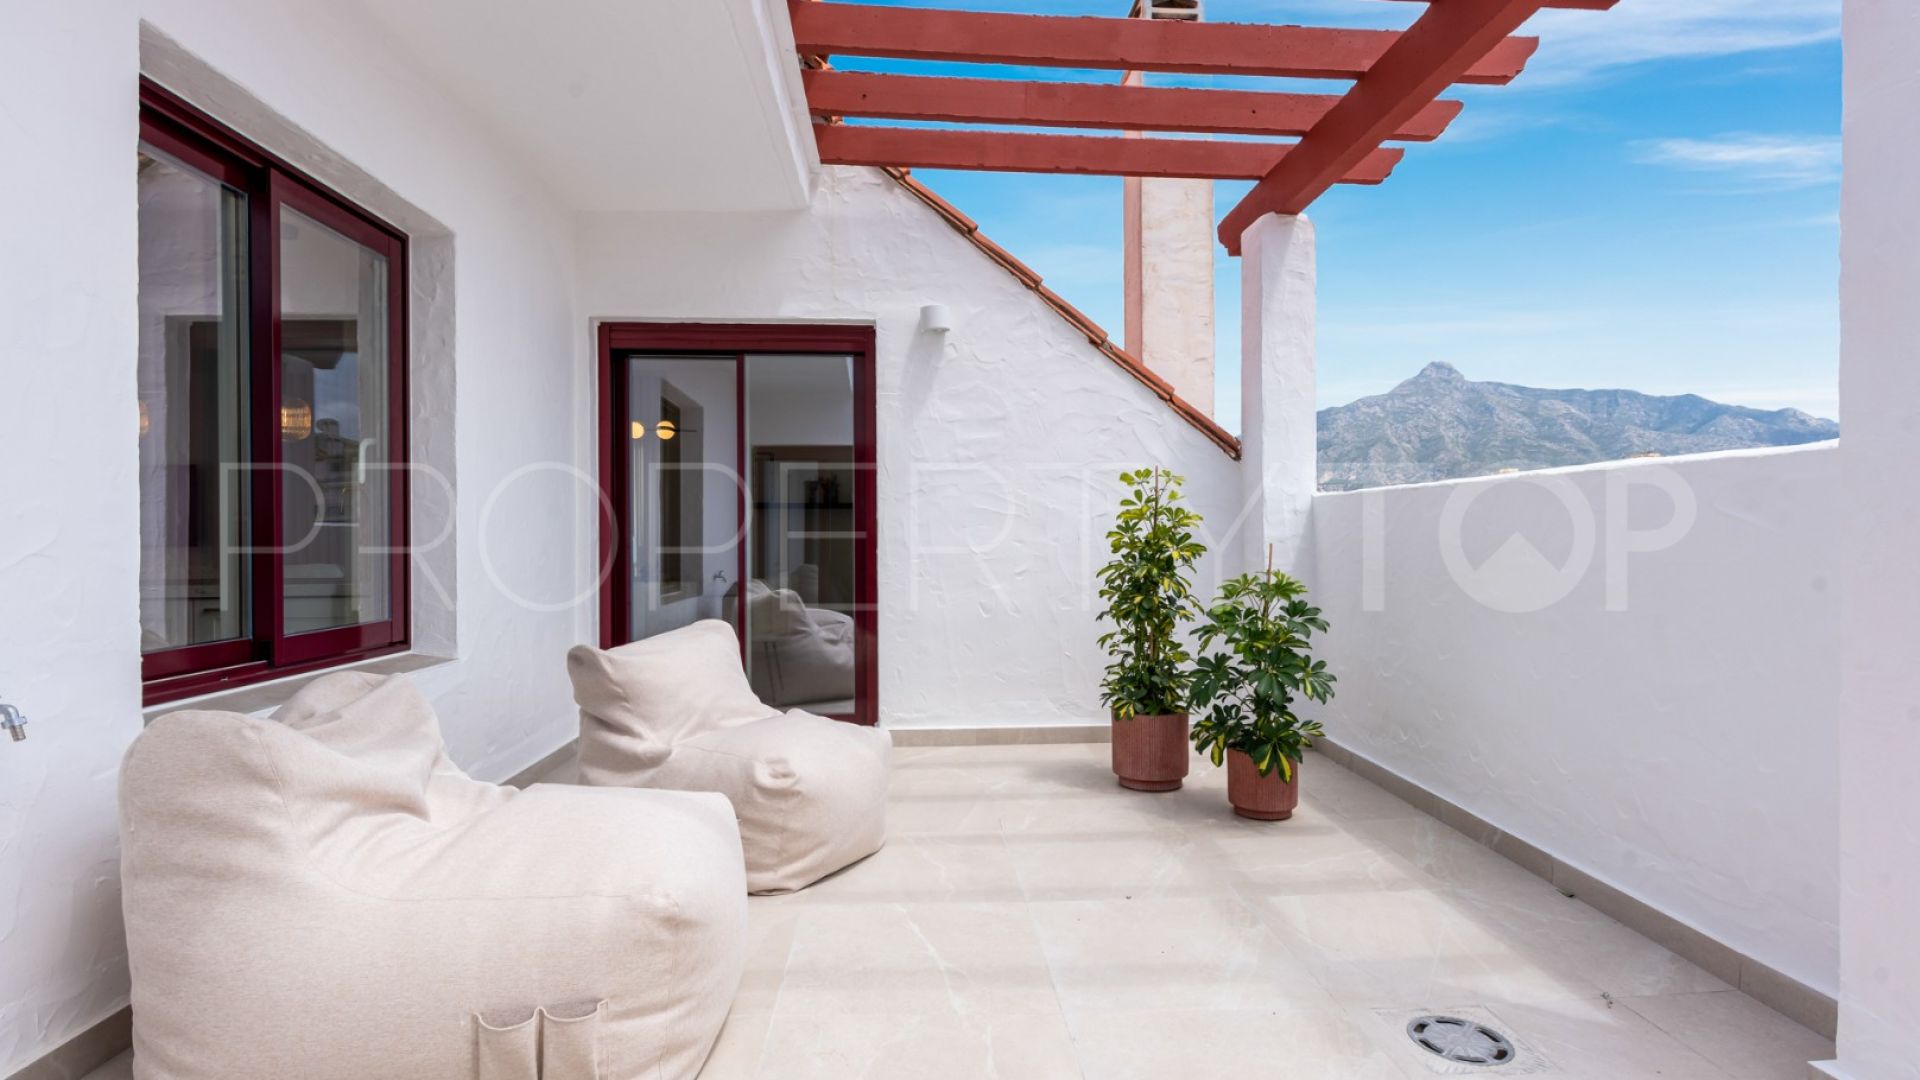 For sale duplex penthouse in La Maestranza with 3 bedrooms